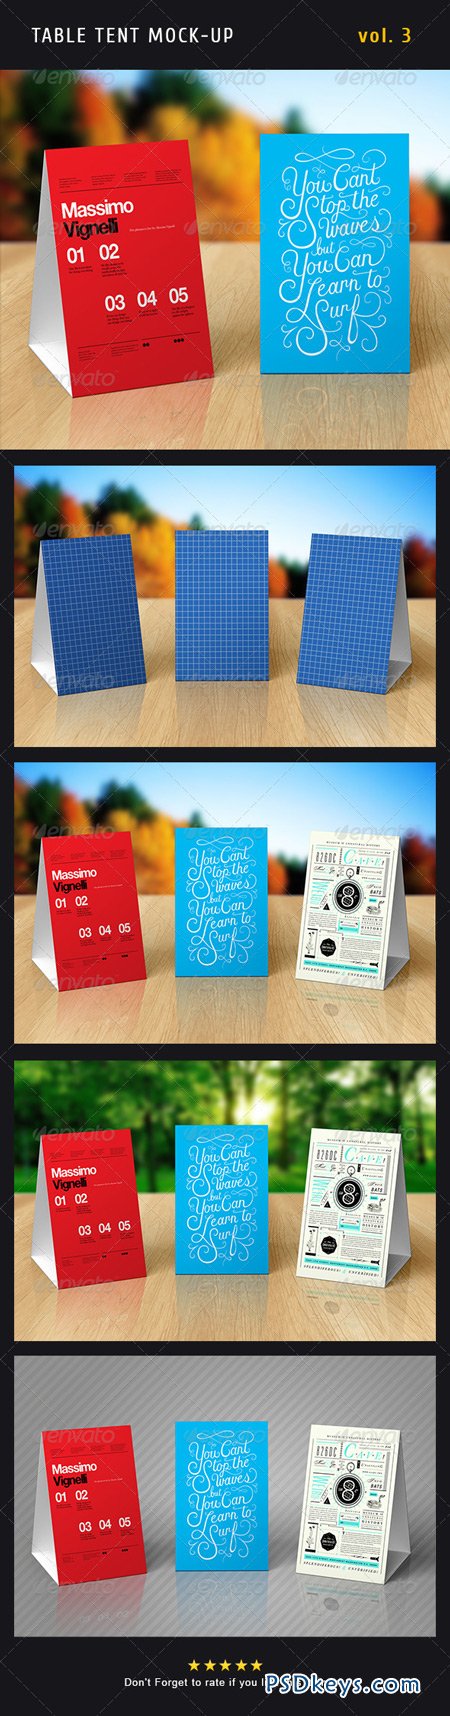 Paper Table Tent Mock-up Template Vol.3 5074693